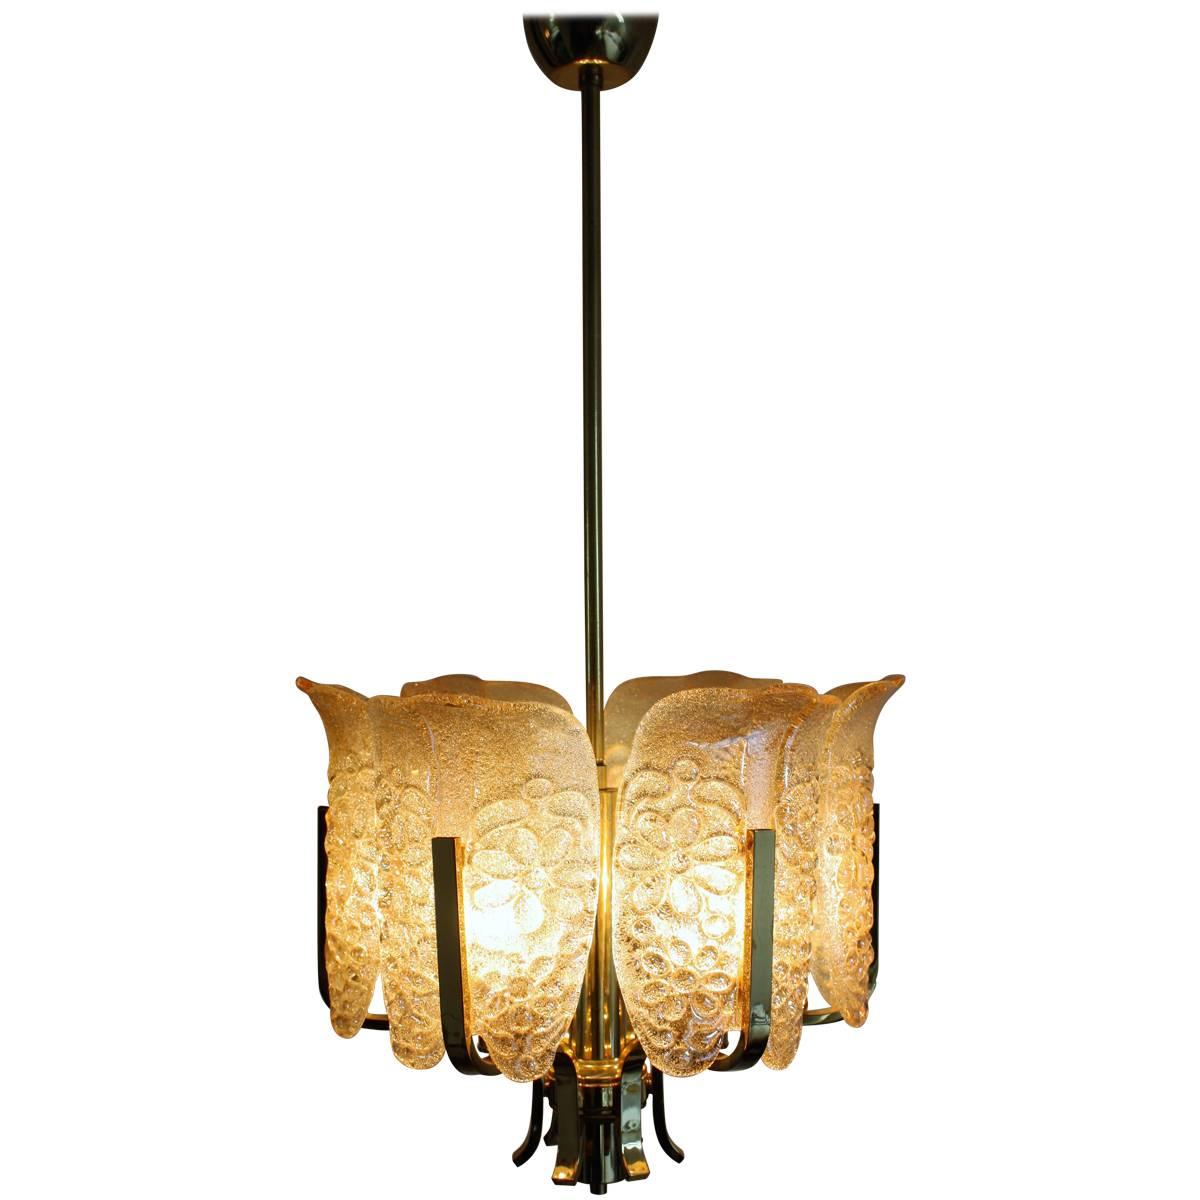 Amber Glass and Brass Chandelier by C. Fagerlund for Orrefors, circa 1960s For Sale